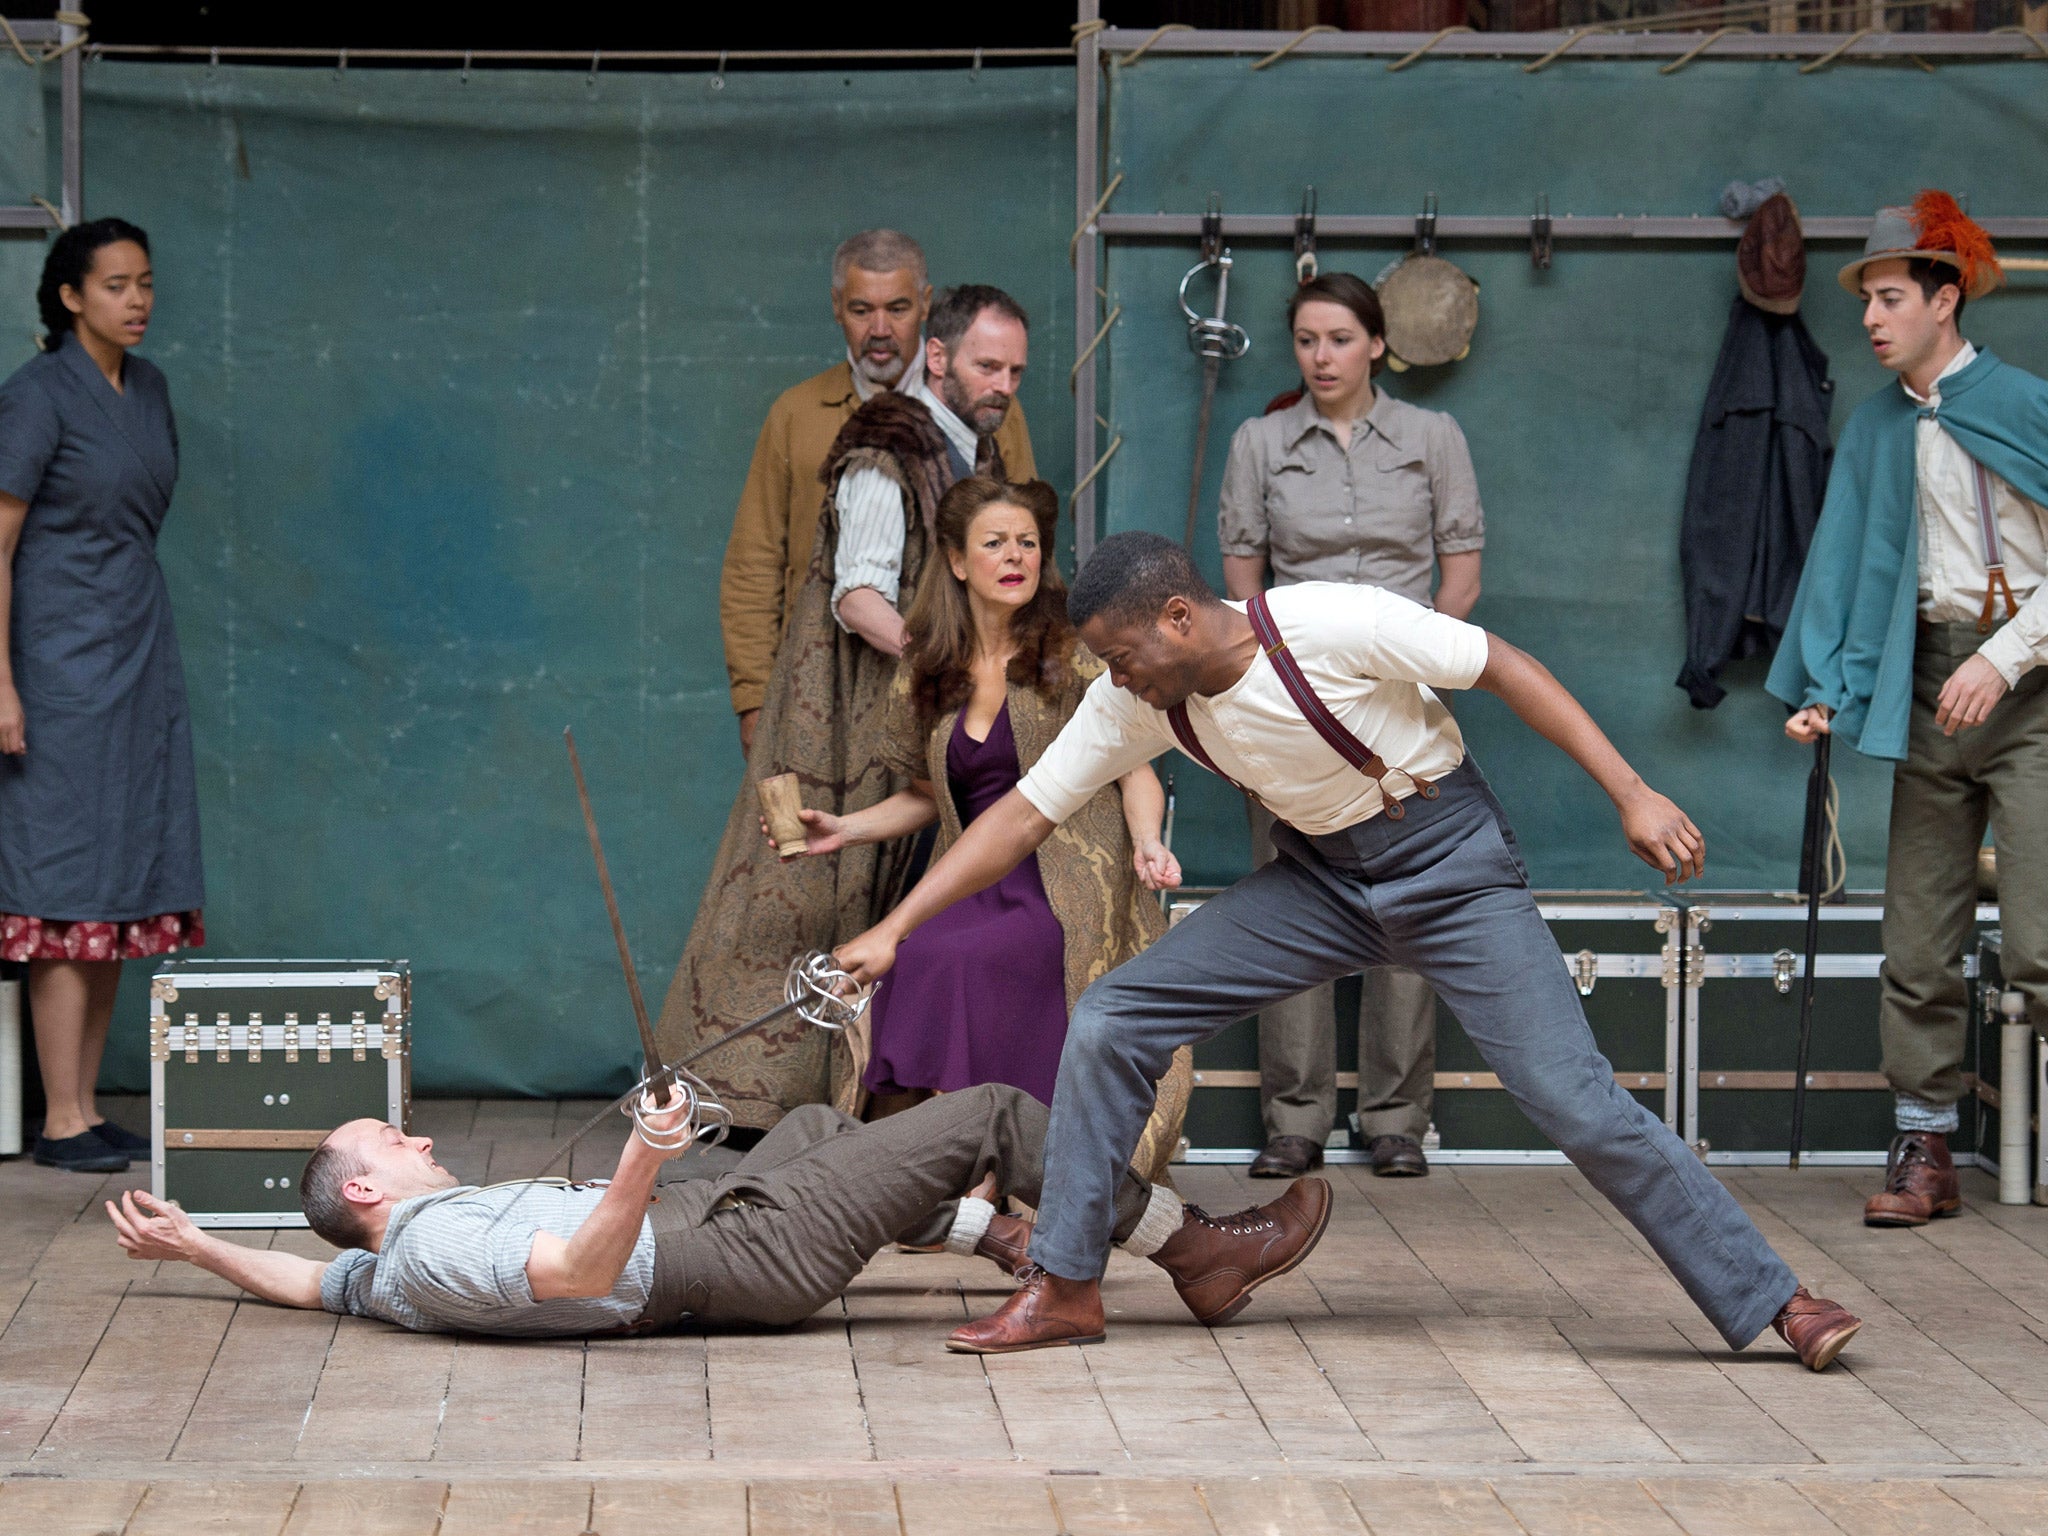 Members of the cast of a new touring production of William Shakespeare's 'Hamlet' perform at the Globe theatre in London